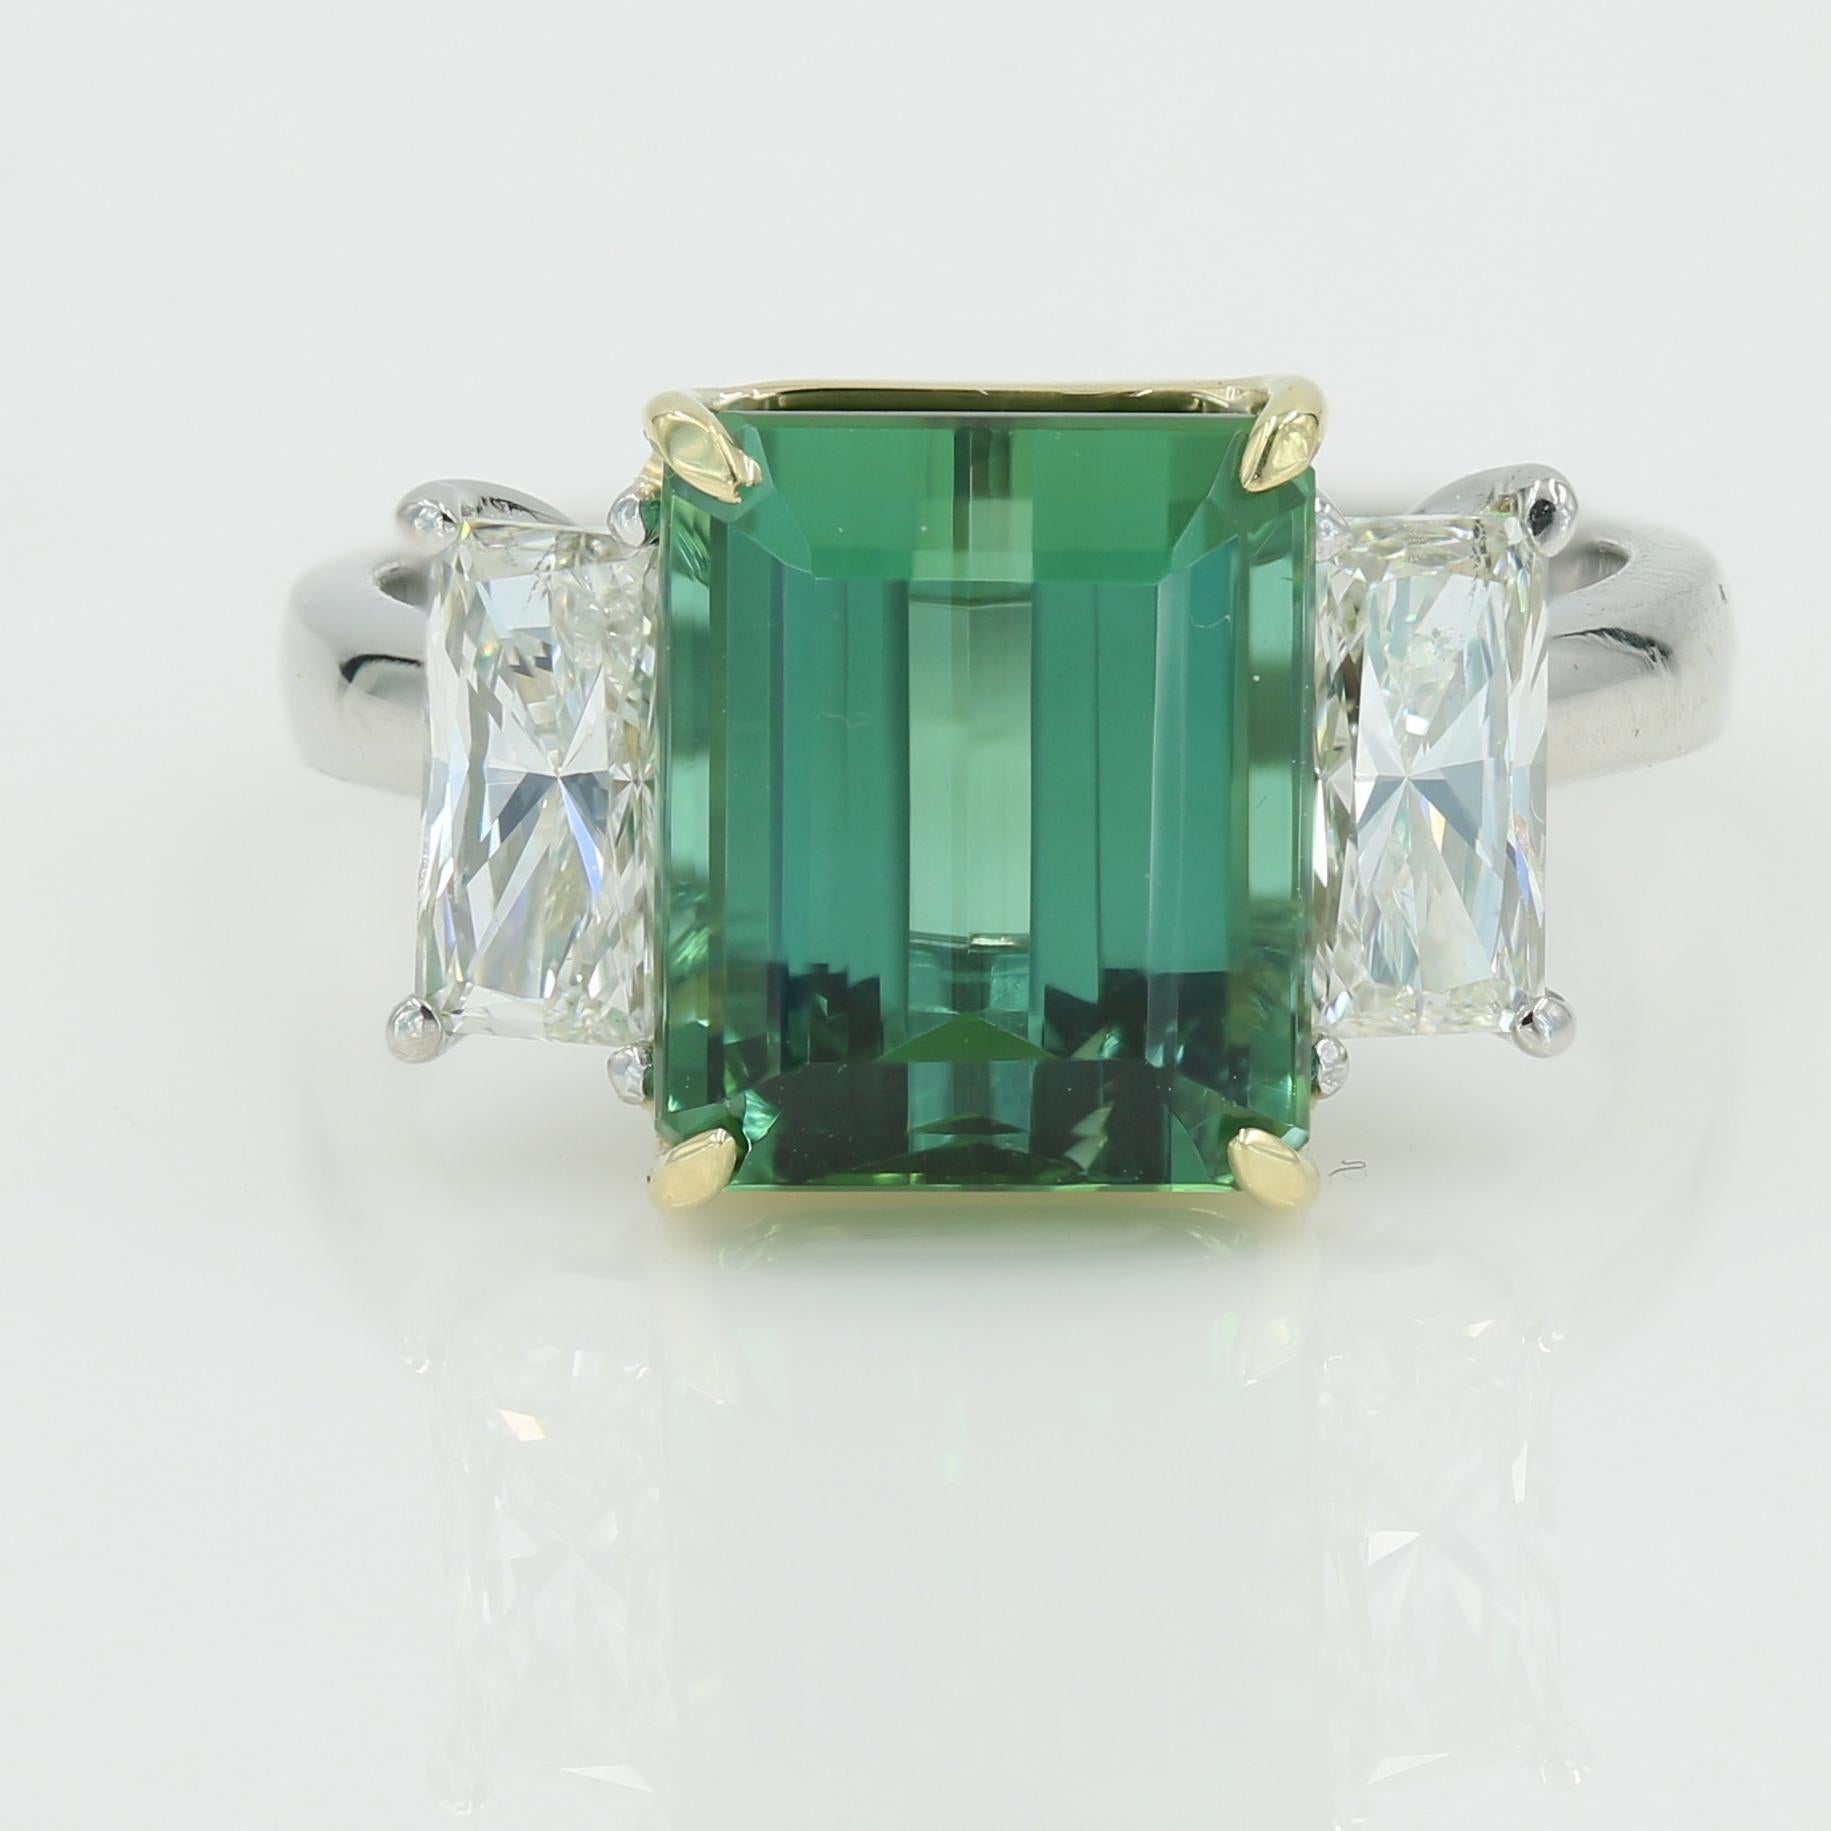 Very Fine Emerald Cut Natural Green Tourmaline weighing 4.81cts. set in a Platinum & 18kt Yellow gold setting with 2 rectangular shaped princess cut diamonds = 1.00tw (I-J SI2) - Mtg is Pre-owned

Finger size is 5 1/4 - can be sized if needed.